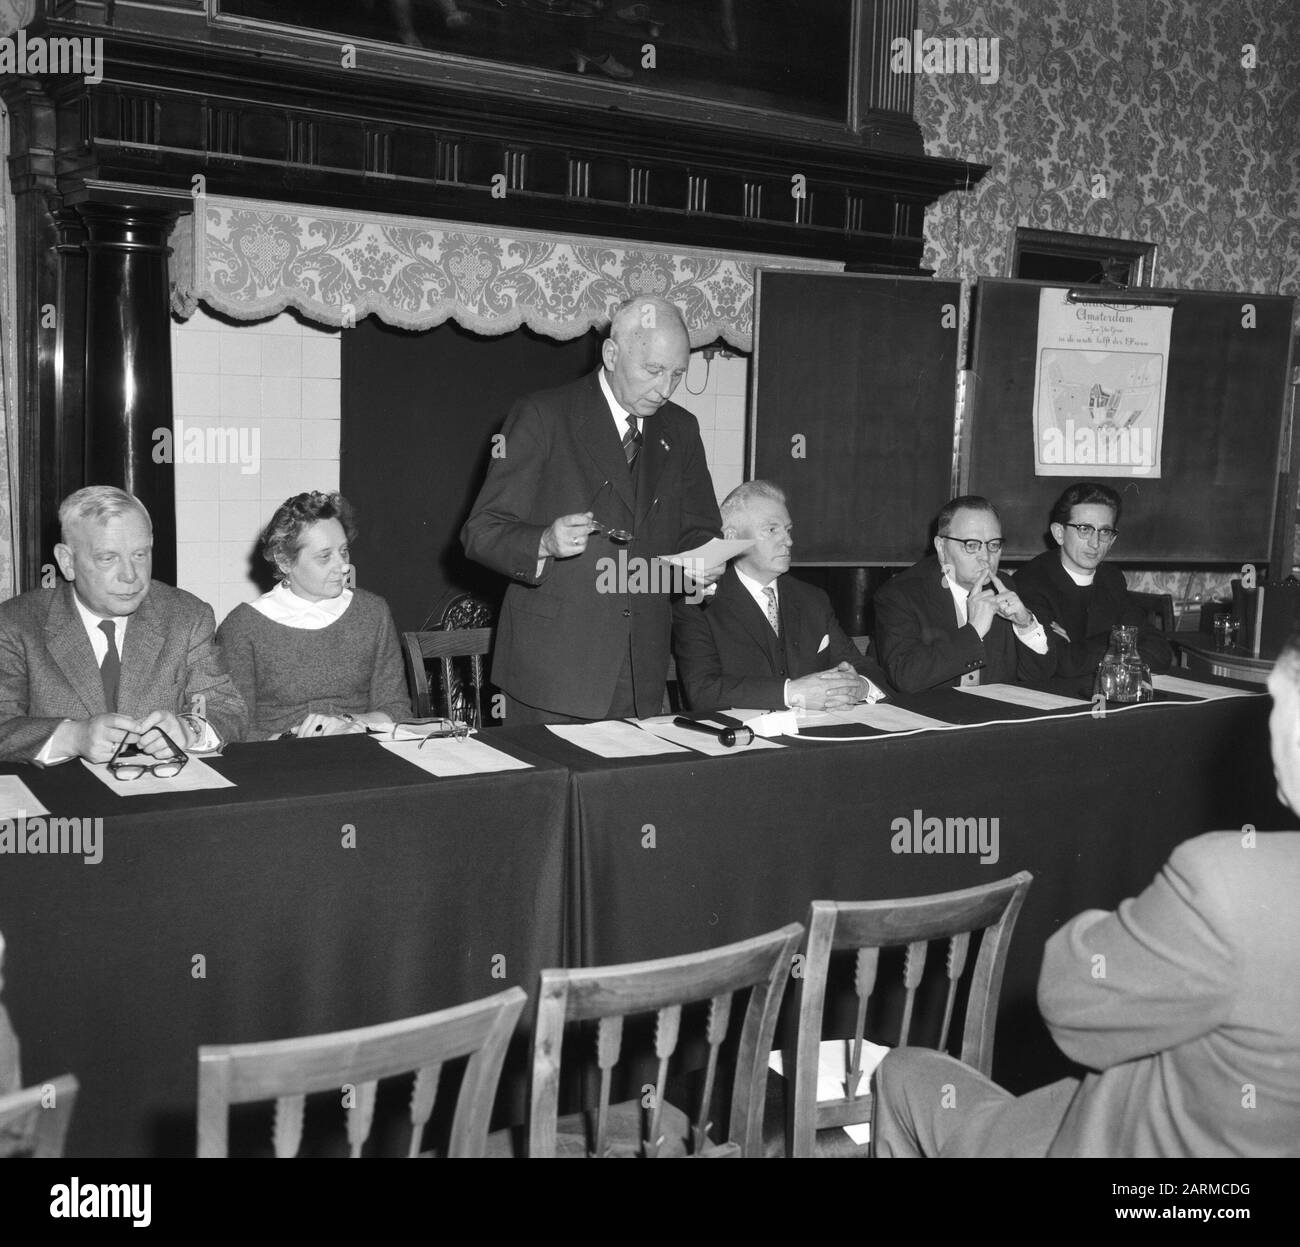 Simposio sui dialetti di Amsterdam e Rotterdam ad Amsterdam, v.l.n.r., pater J.J.. Mittelmeijer, prof. Dr. L.J. Rogier, dr. P.J. Meertens and [text aborted] Date: 2 January 1960 Location: Amsterdam, Noord-Holland Keywords: DIALECTES, SIMPOSI Nome personale: Meertens, P.J., Mittelmeijer, J., Rogier, L.J. Foto Stock